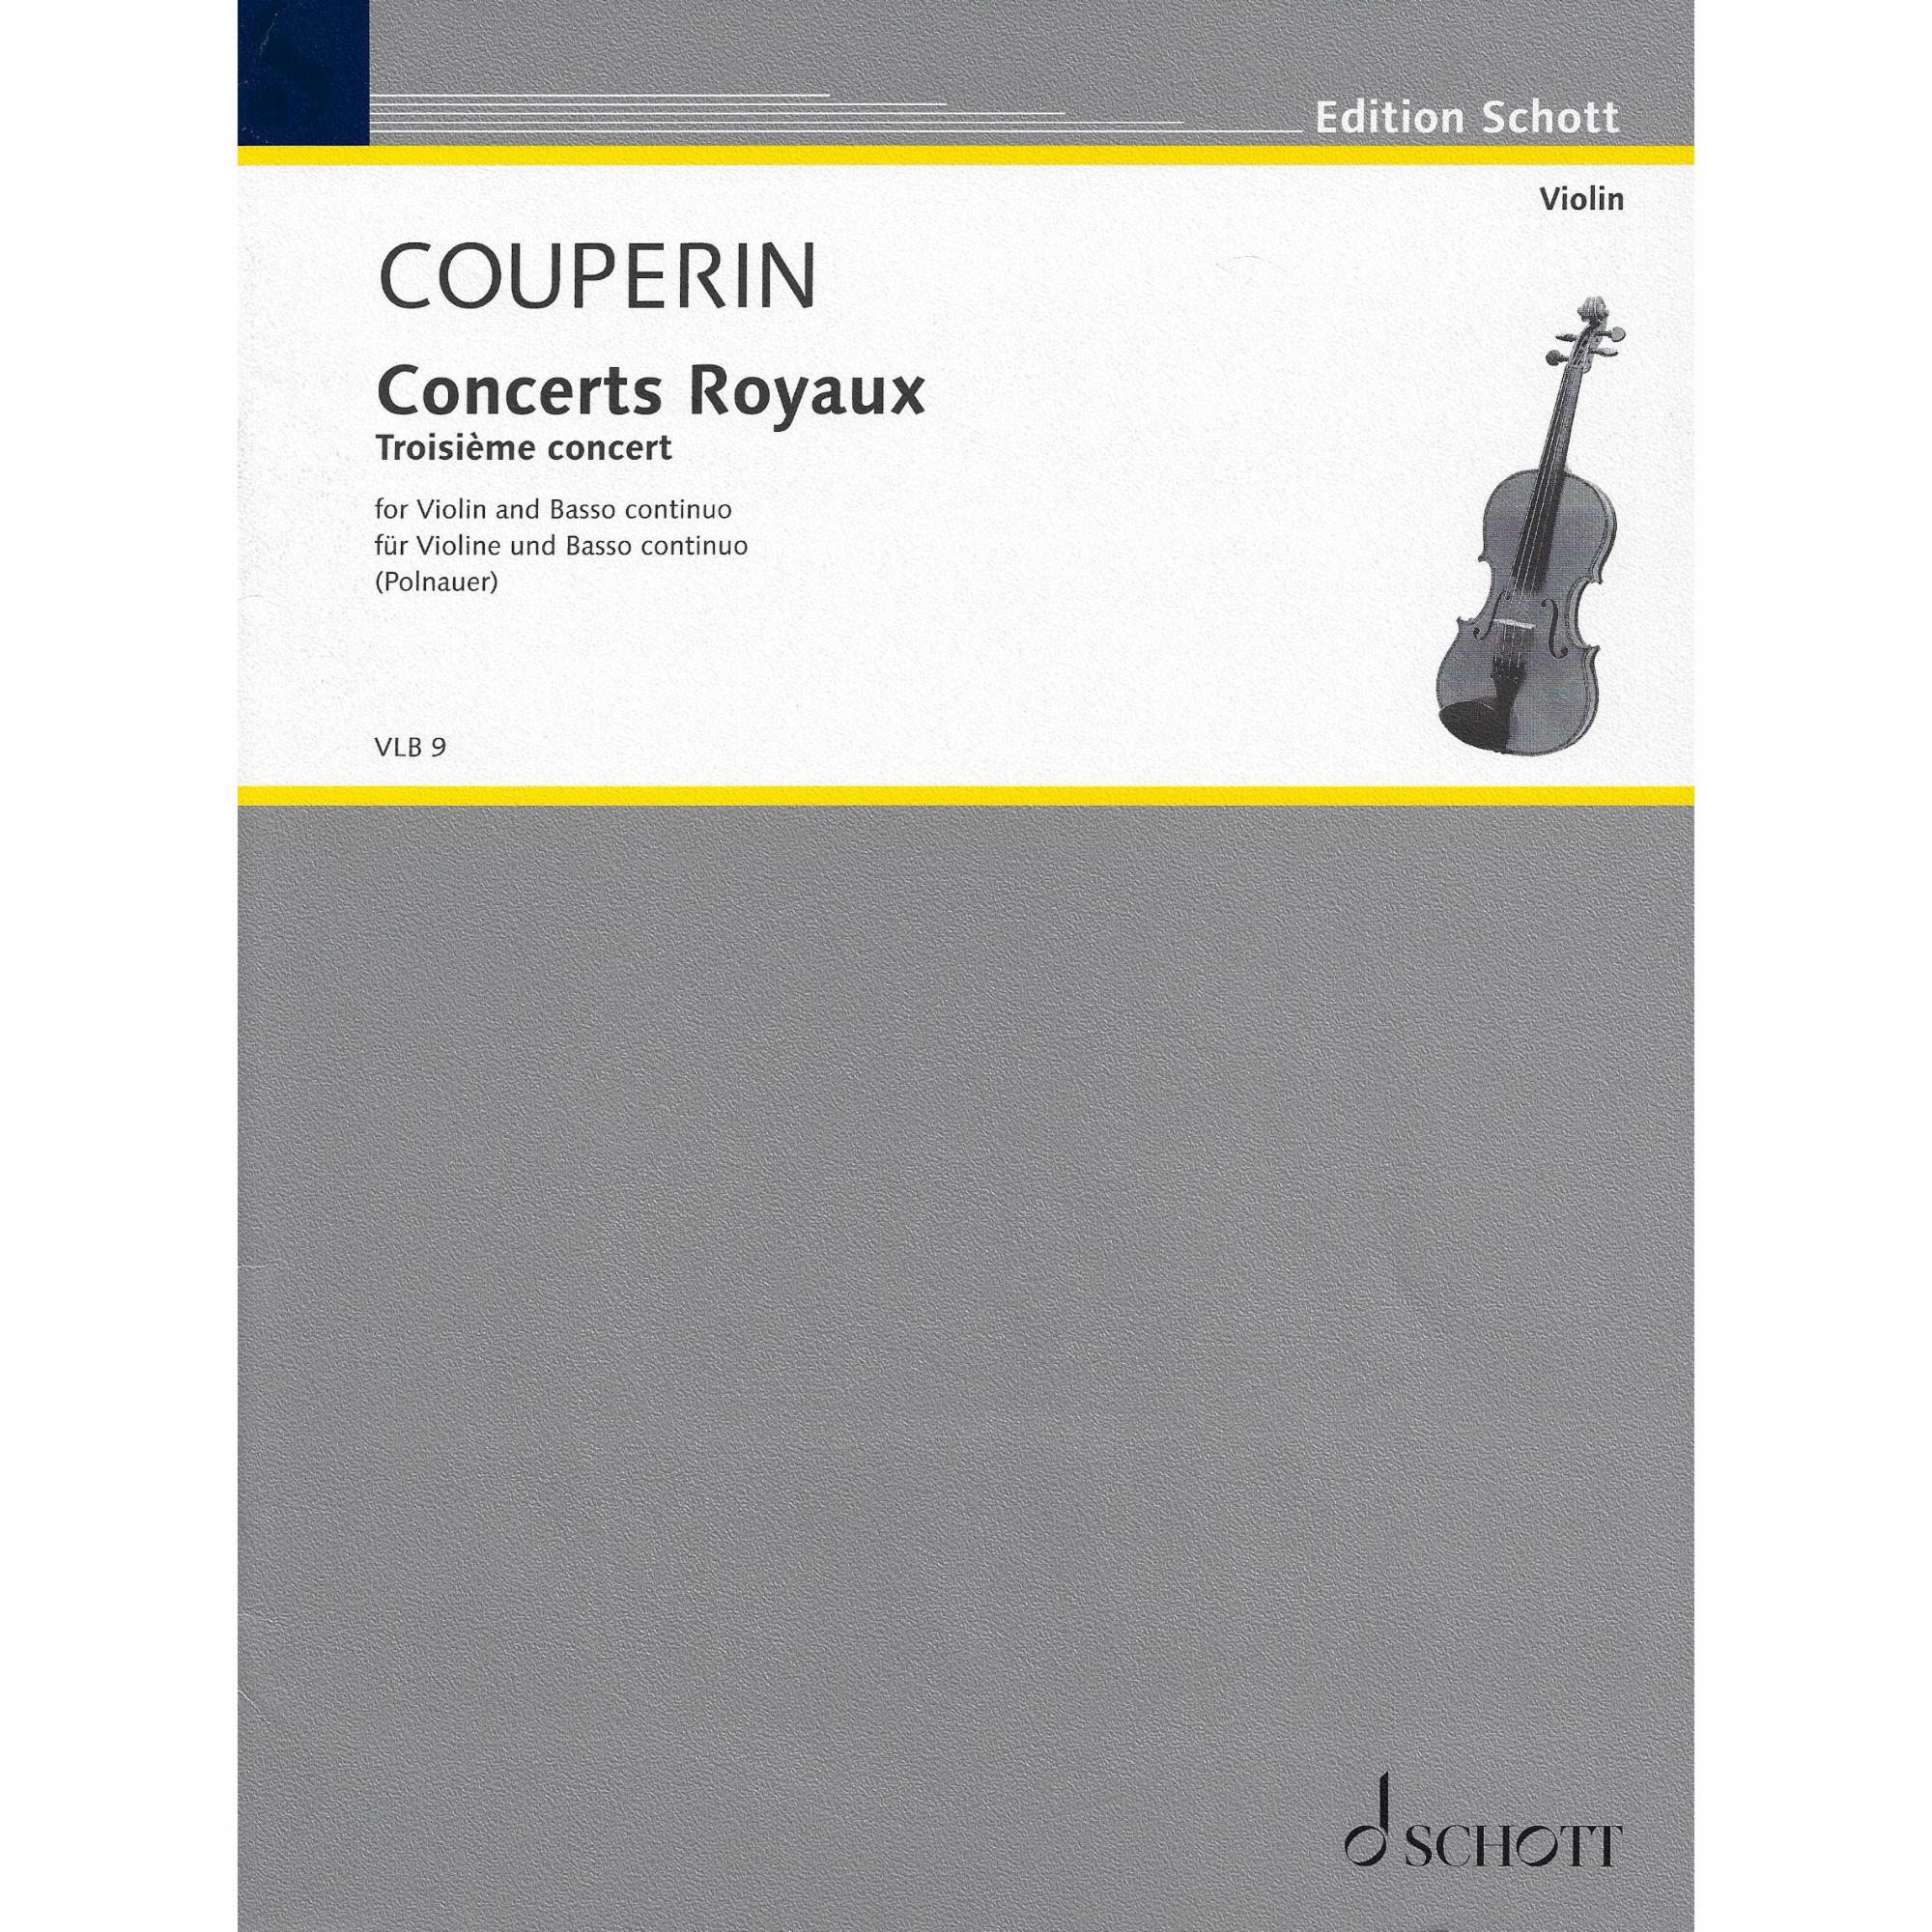 Couperin -- Concerts Royaux: Troisieme concert for Violin and Basso Continuo